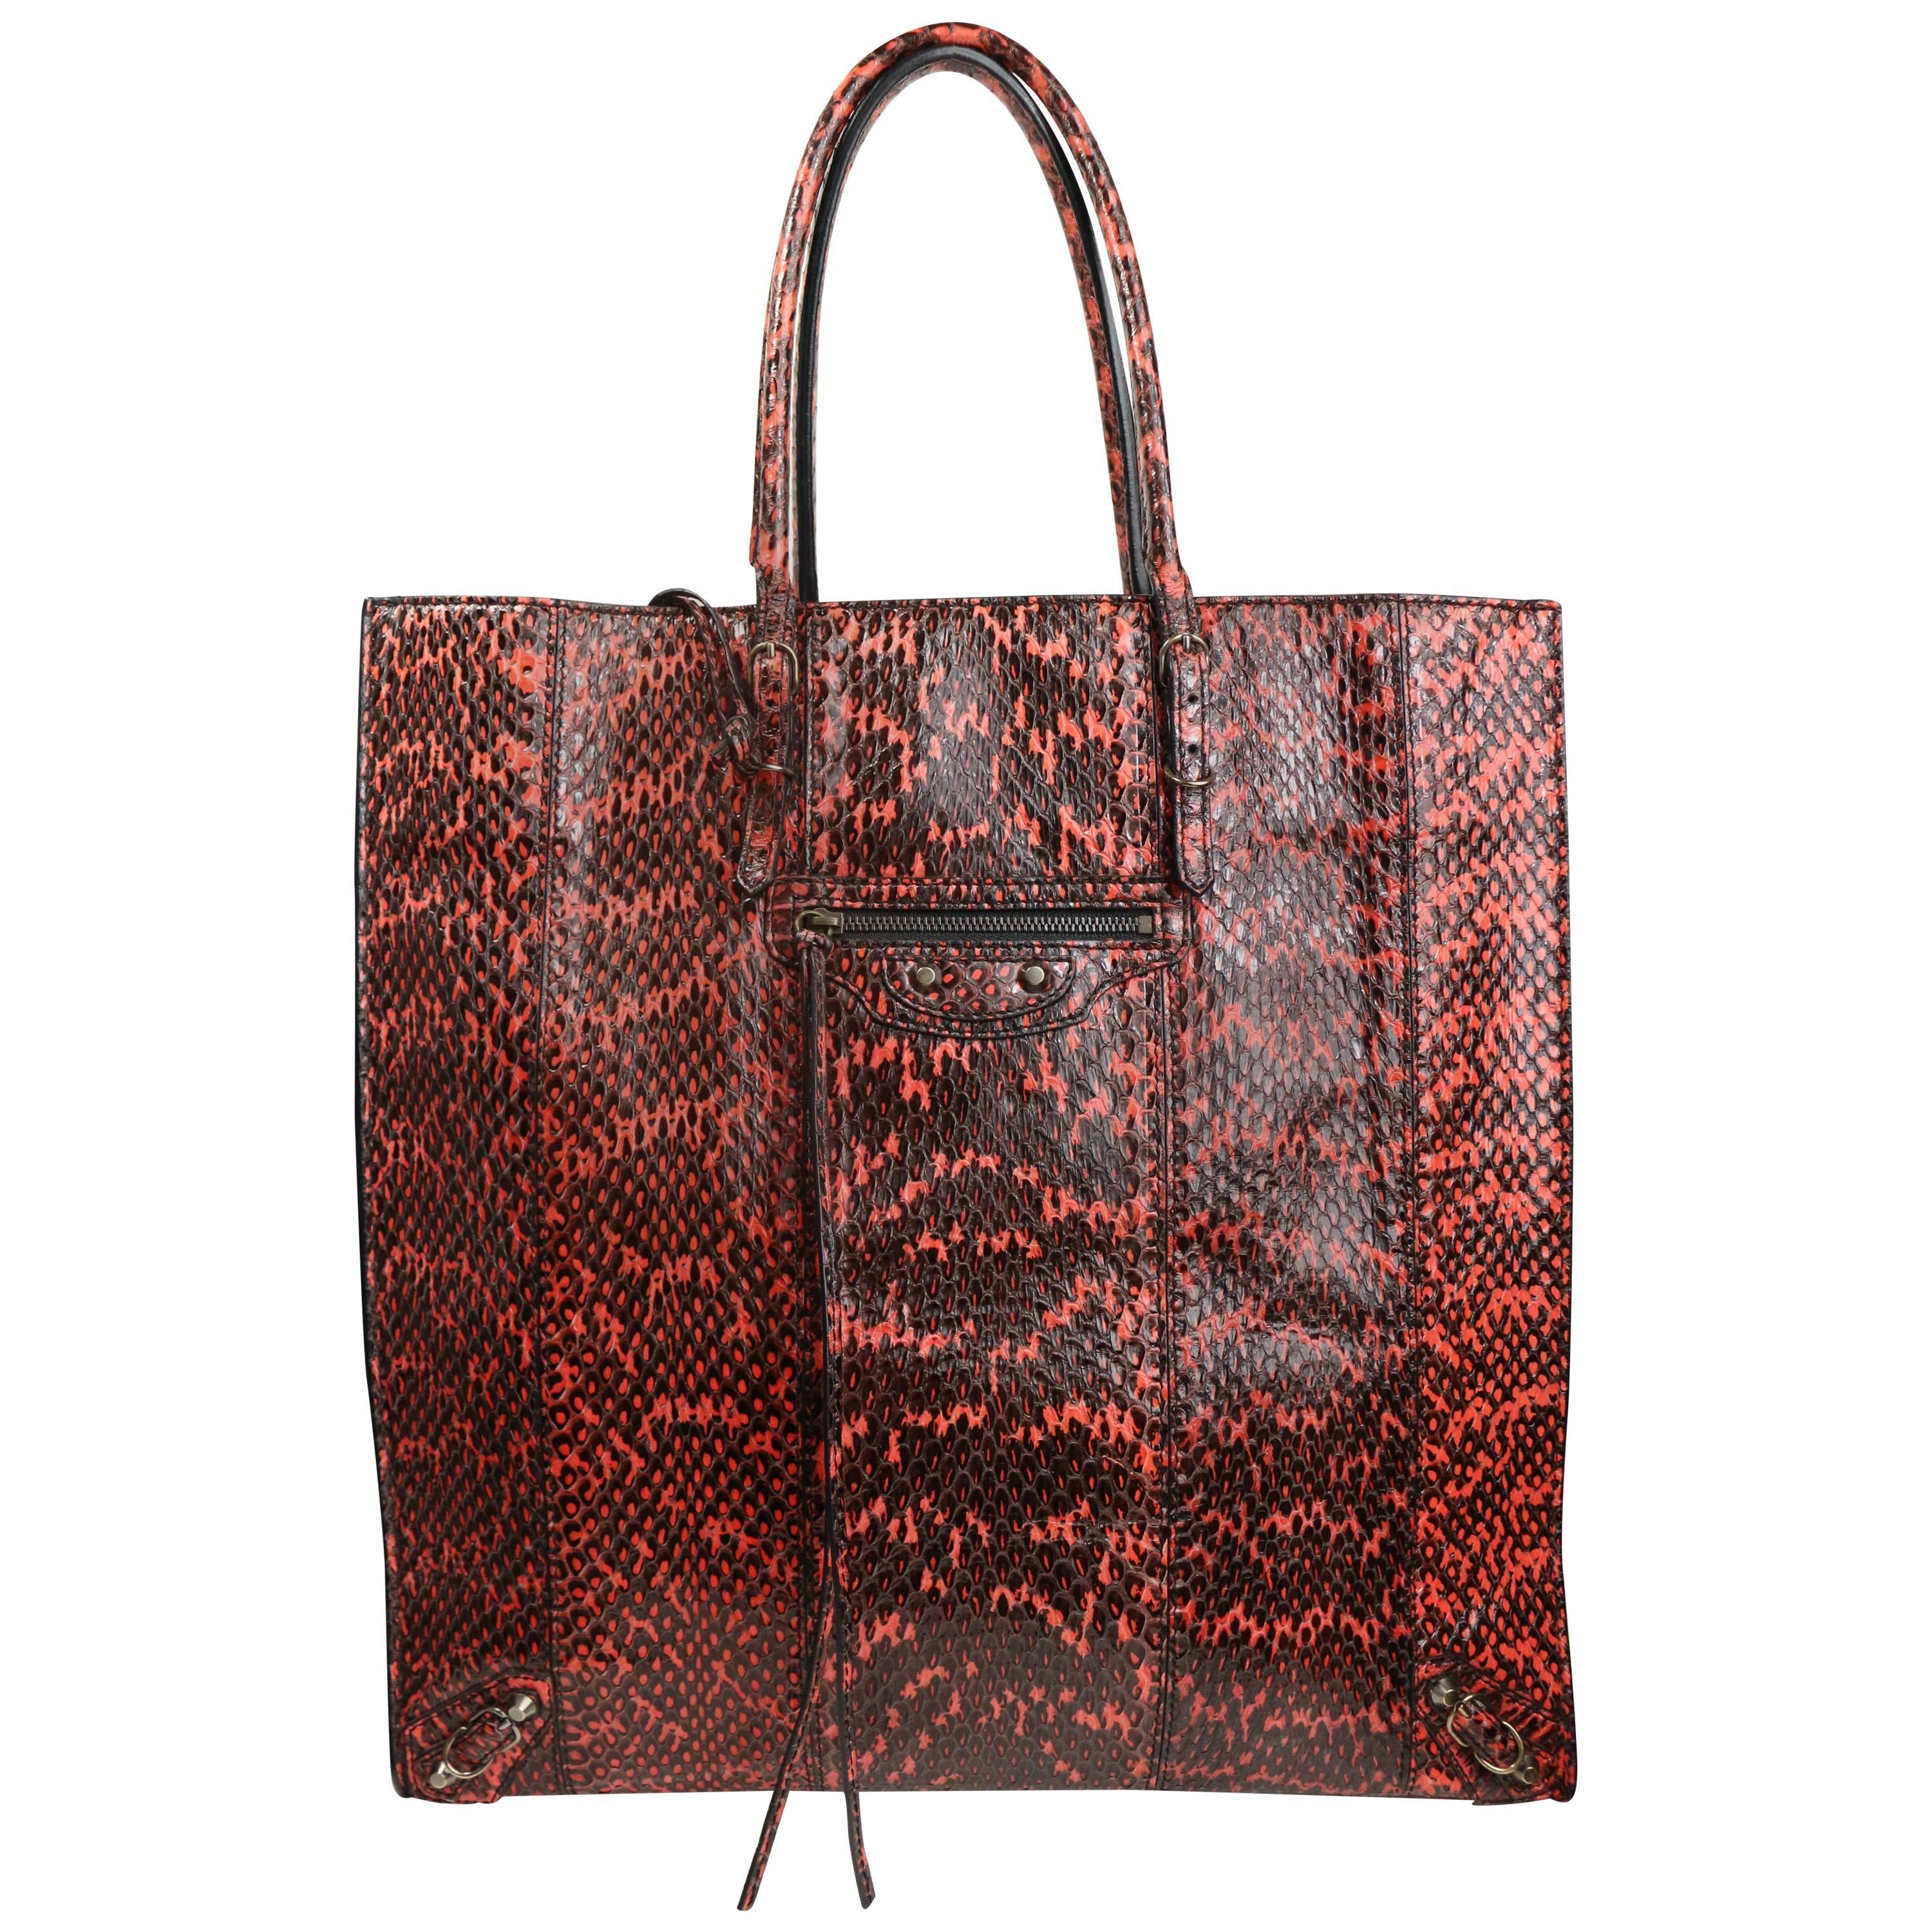 Balenciaga Python Leather Faded black and Coral Paper Tote Bag